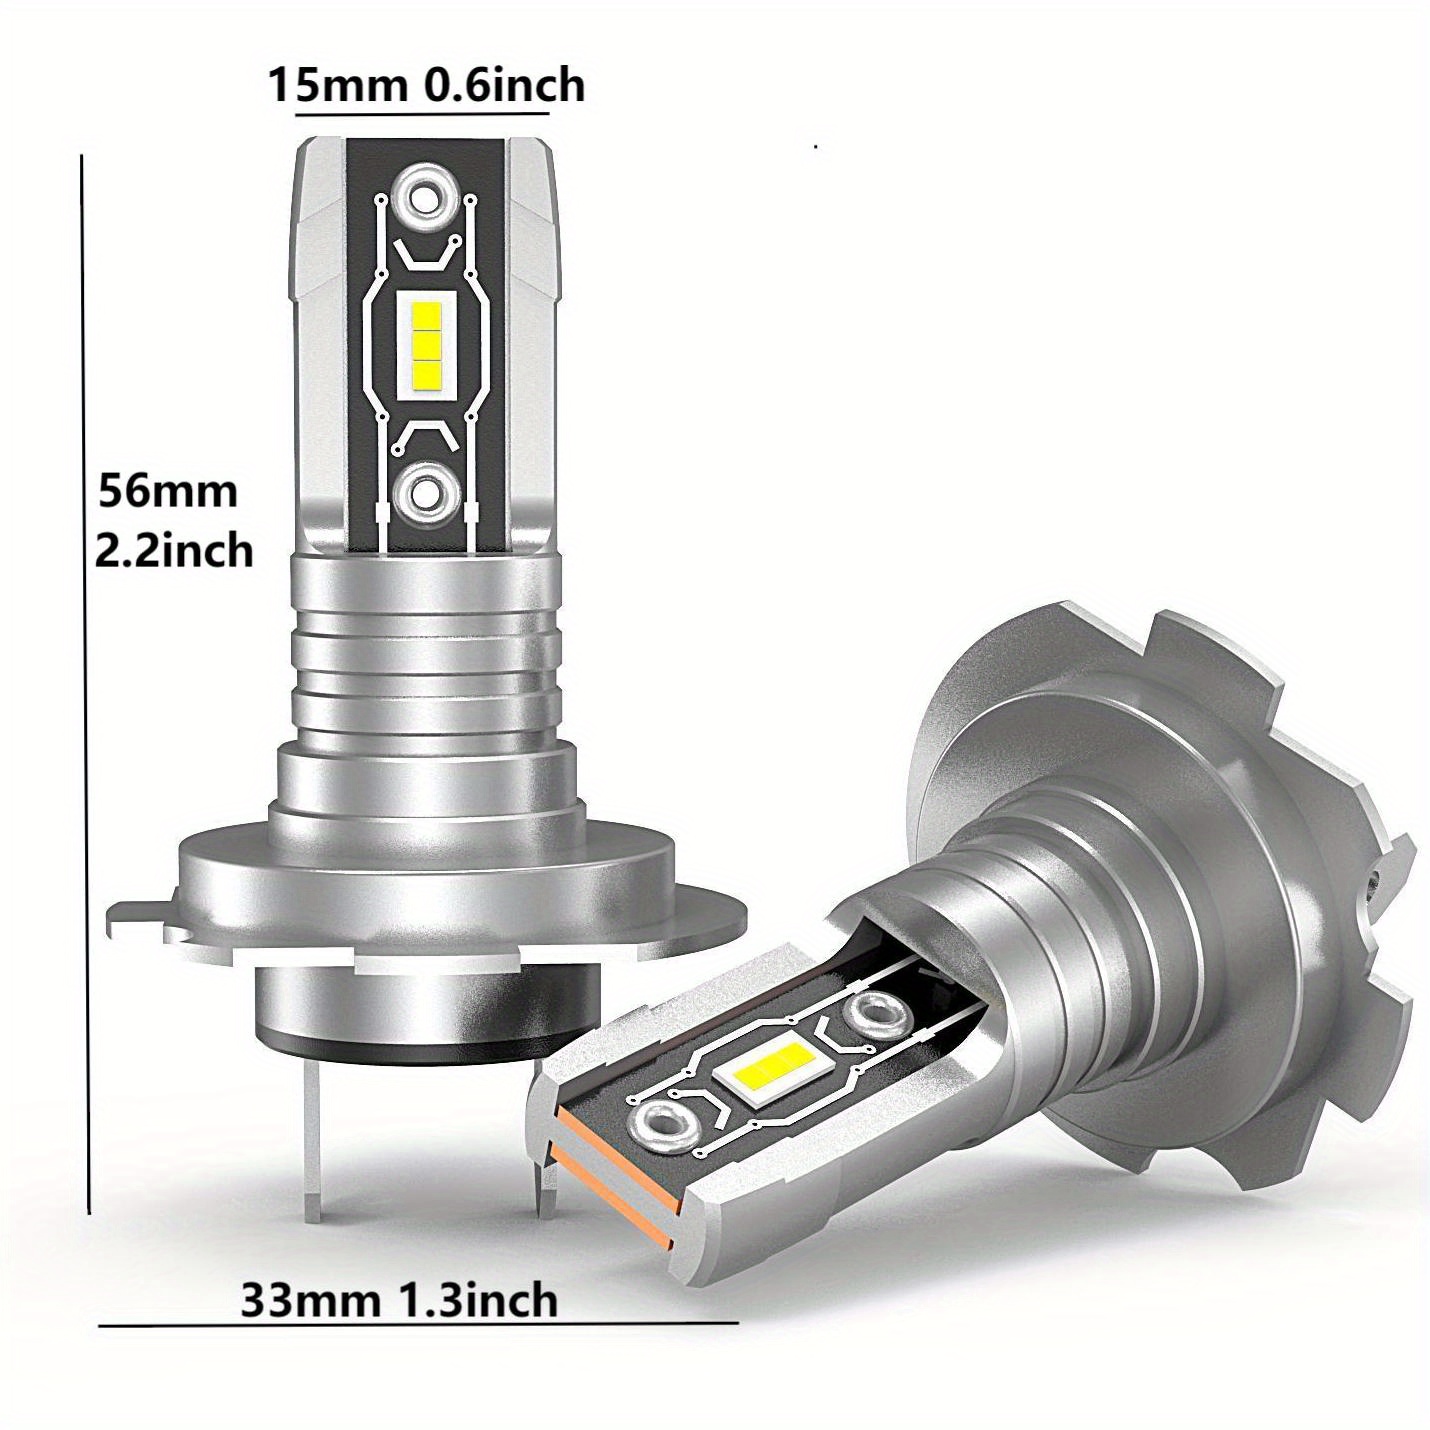 2pcs Super Bright H7 LED Headlight Bulbs - 18000LM 60W 6000K White - Canbus  5530 Chips - For Car, Truck & Motorcycle